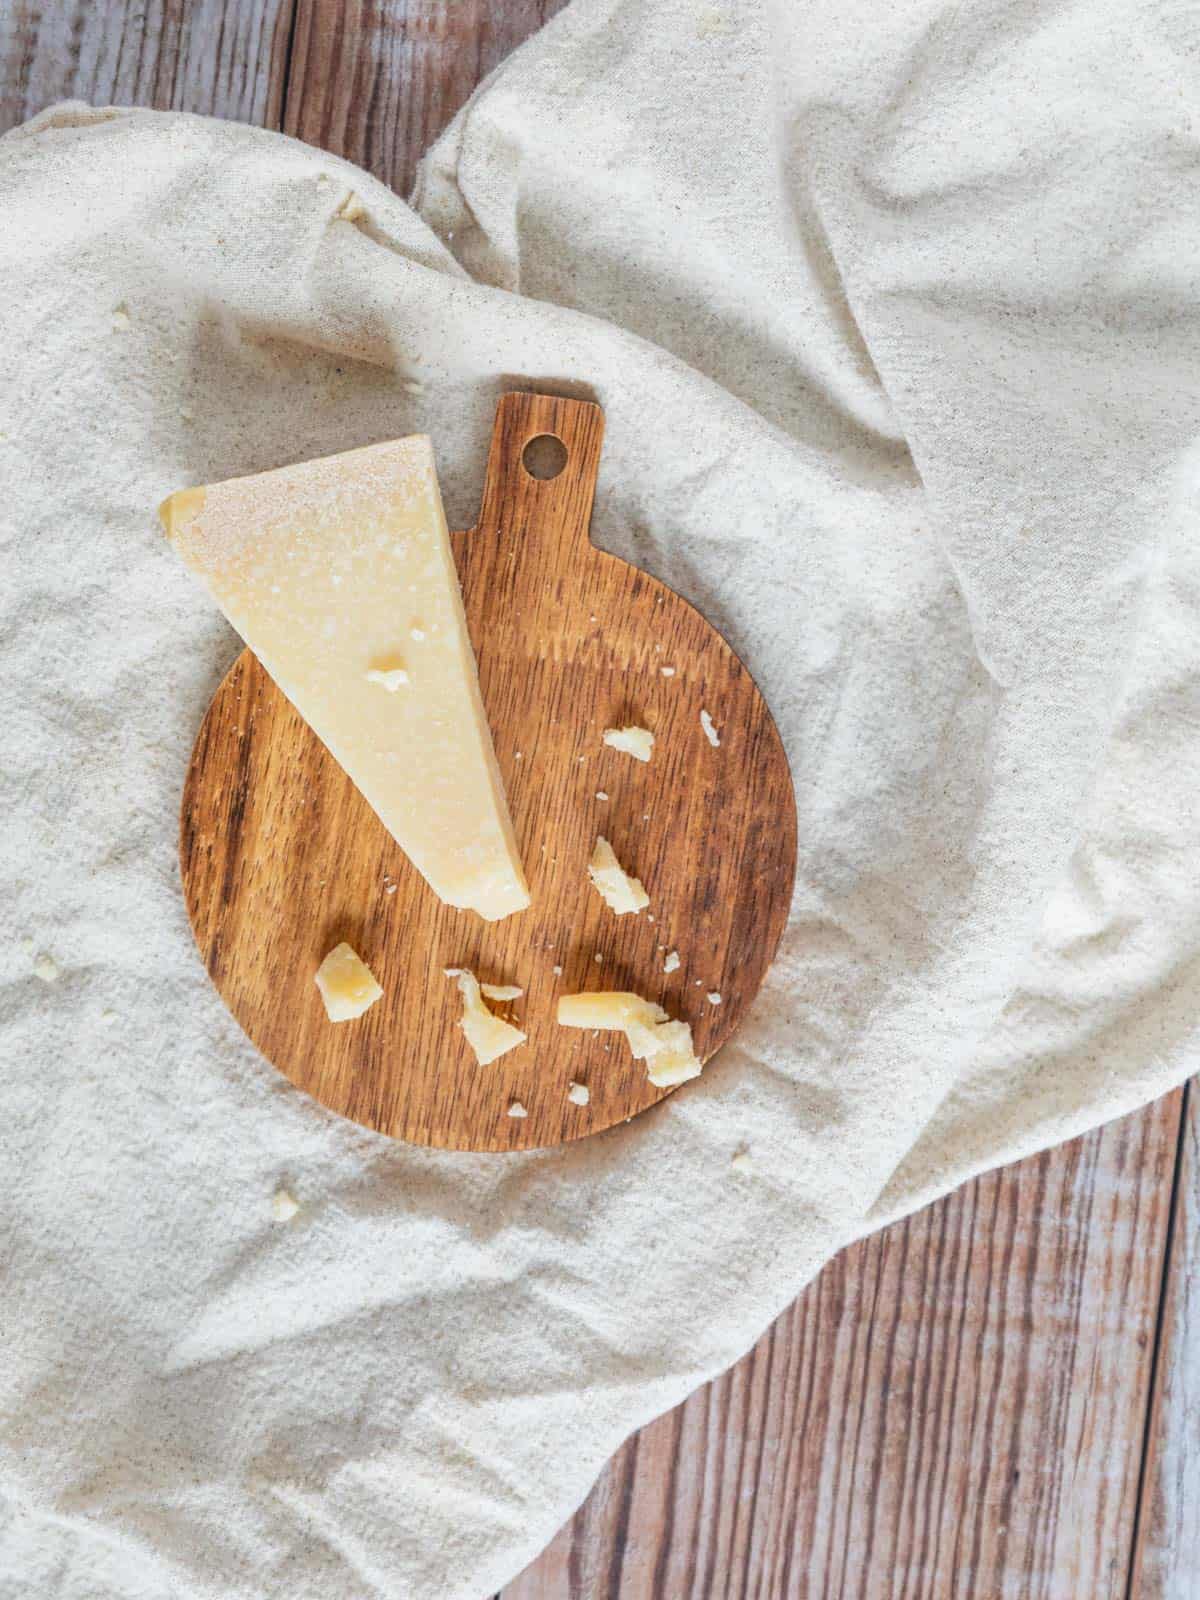 partially crumbled wedge of parmigiano-reggiano cheese on a wooden circle.